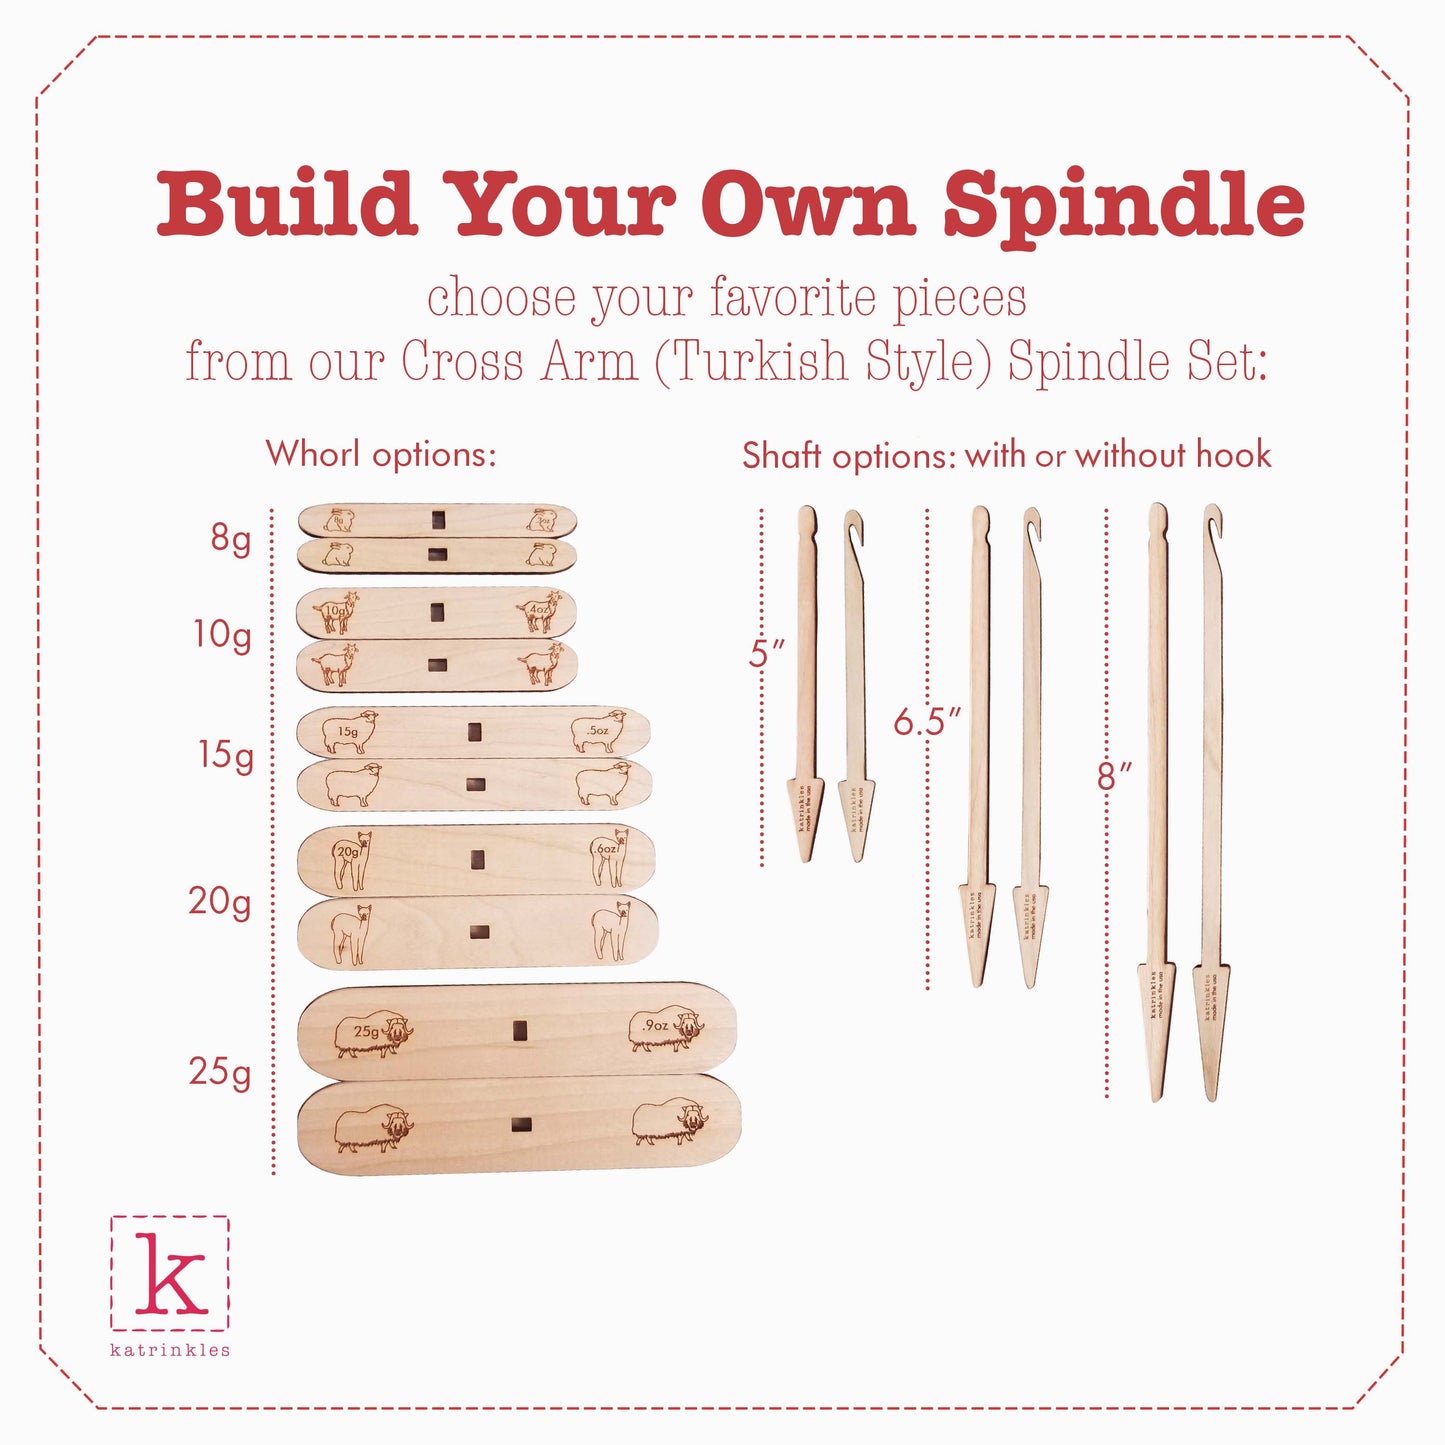 Build Your Own Spindle